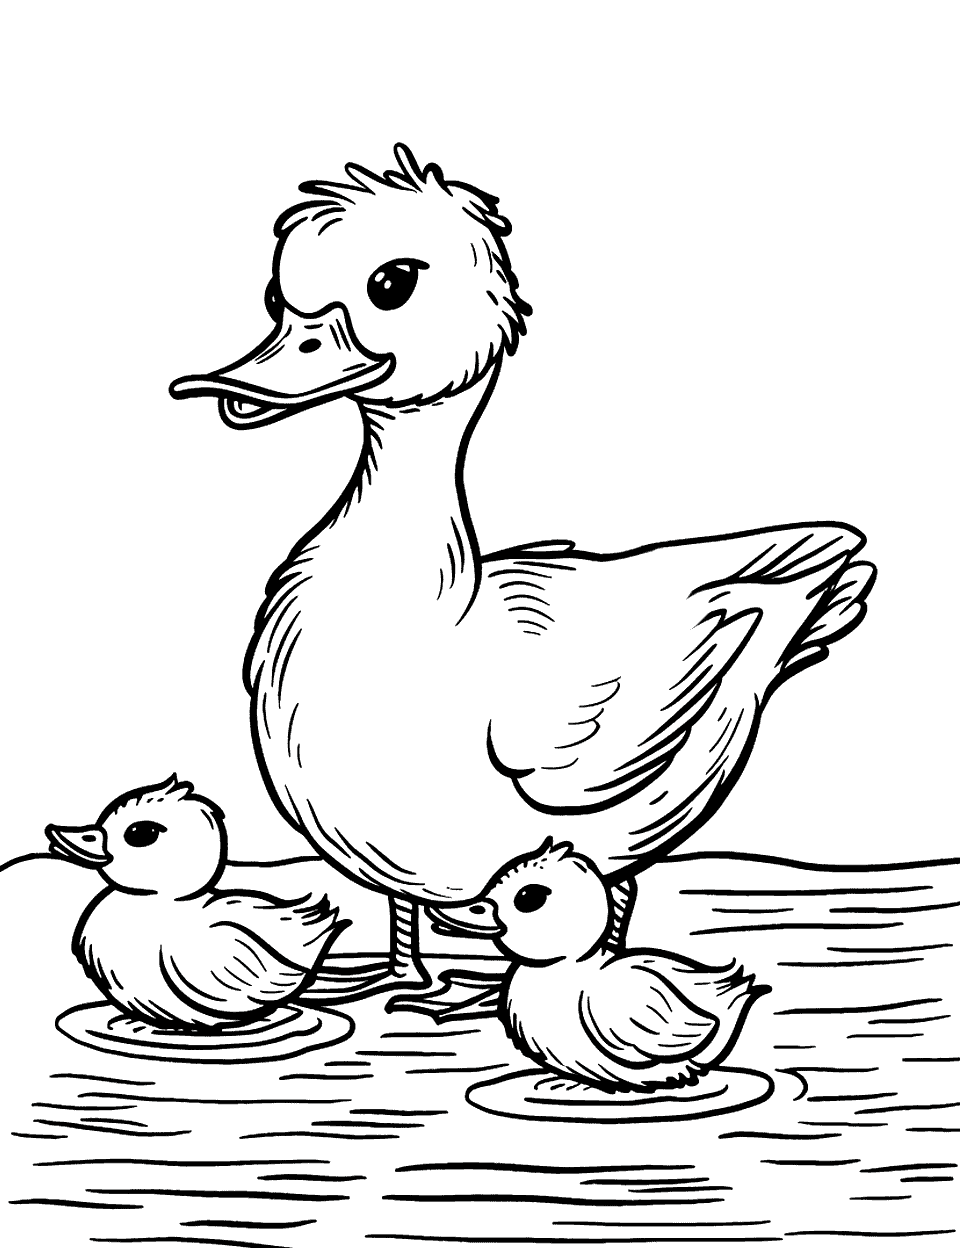 Mother Duck and Ducklings Coloring Page - A mother duck and her ducklings standing together.